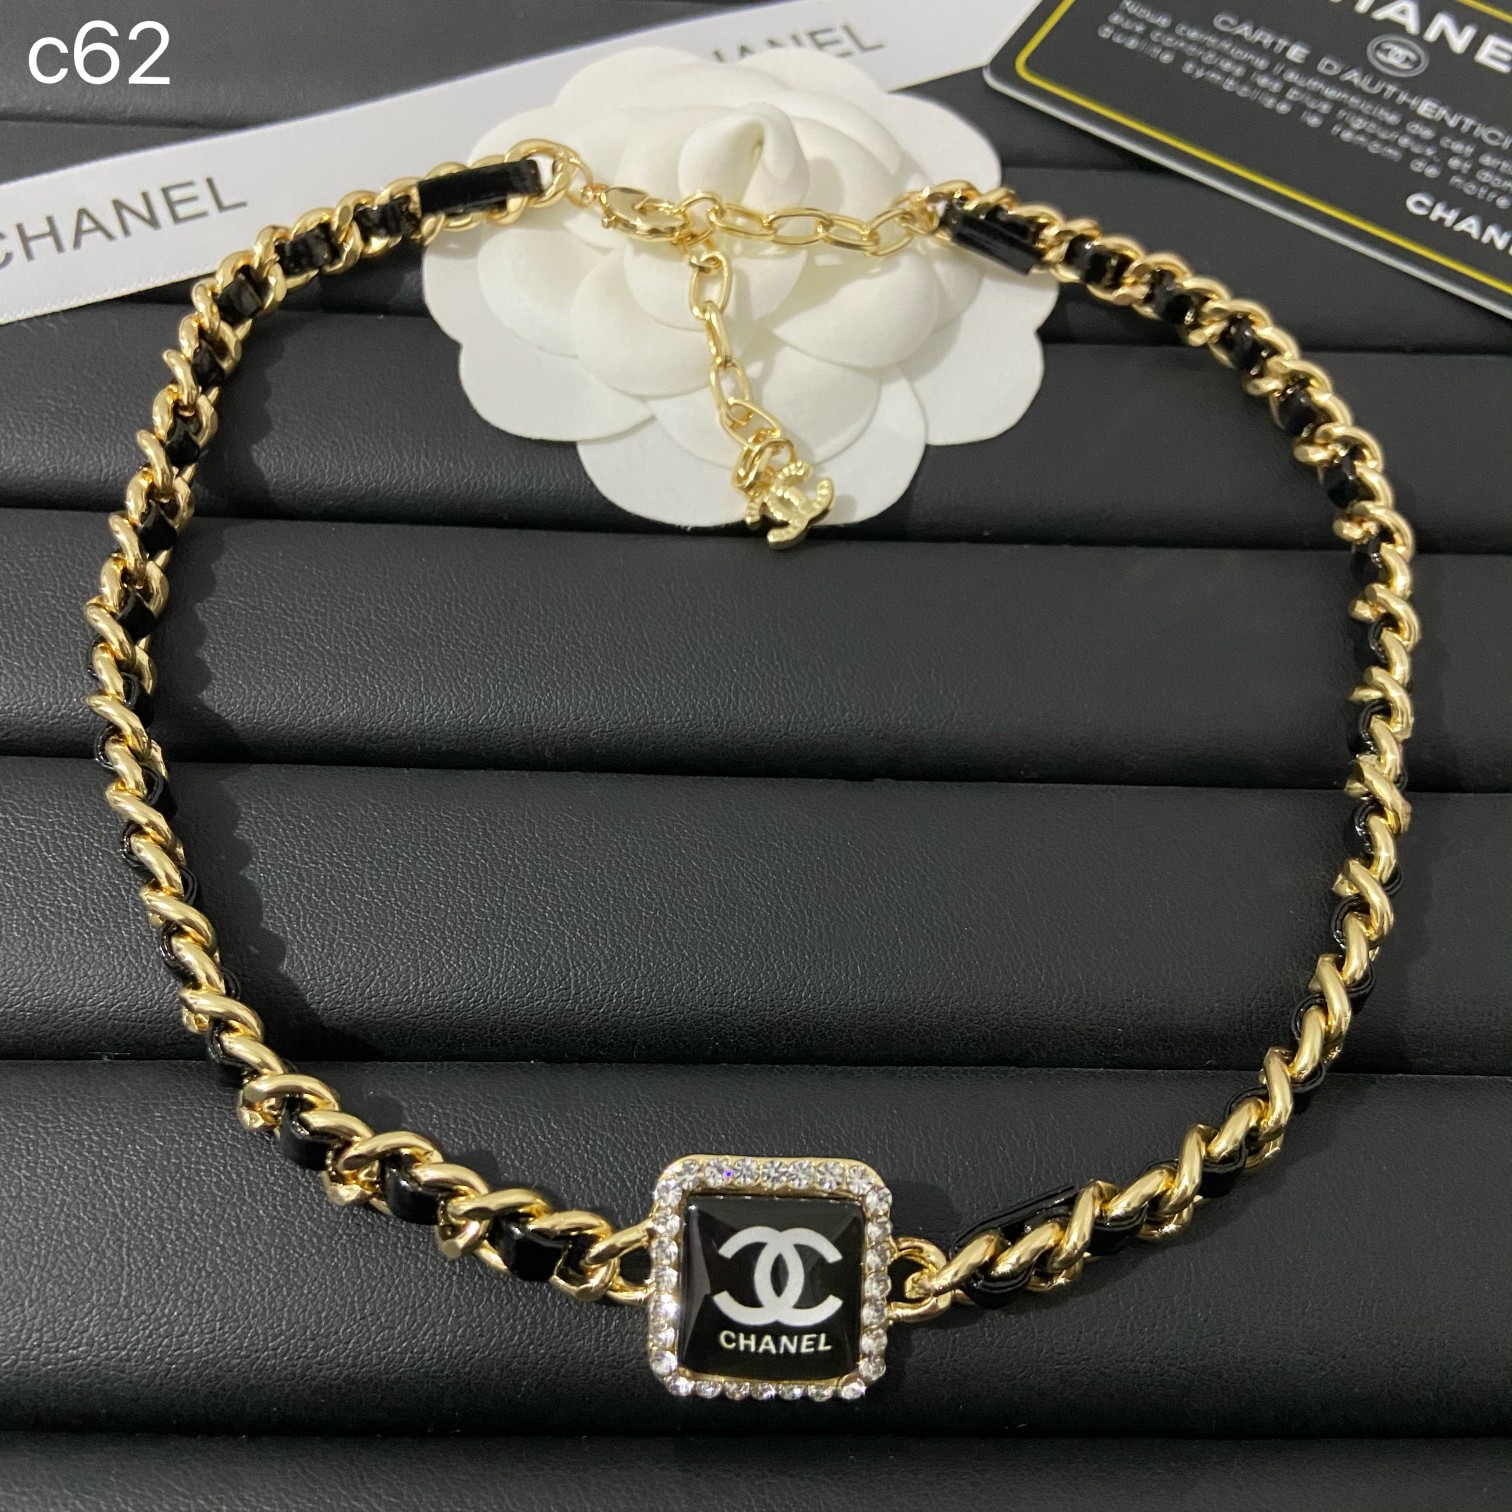 Chanel necklace 107525